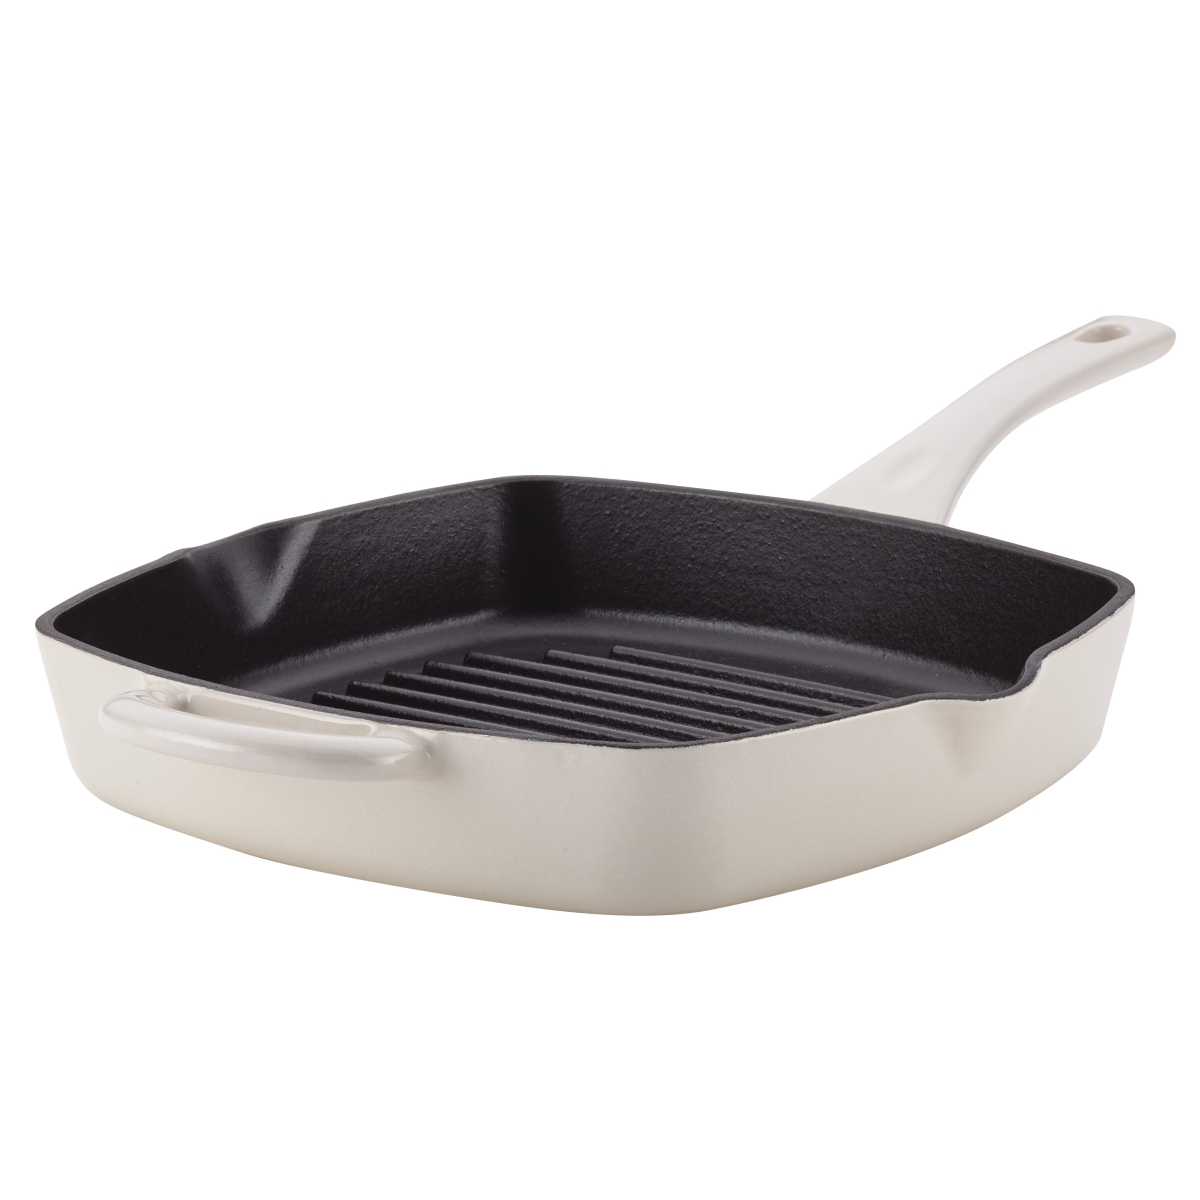 47435 Cast Iron Square Grill Pan With Pour Spouts, 10 In. - French Vanilla